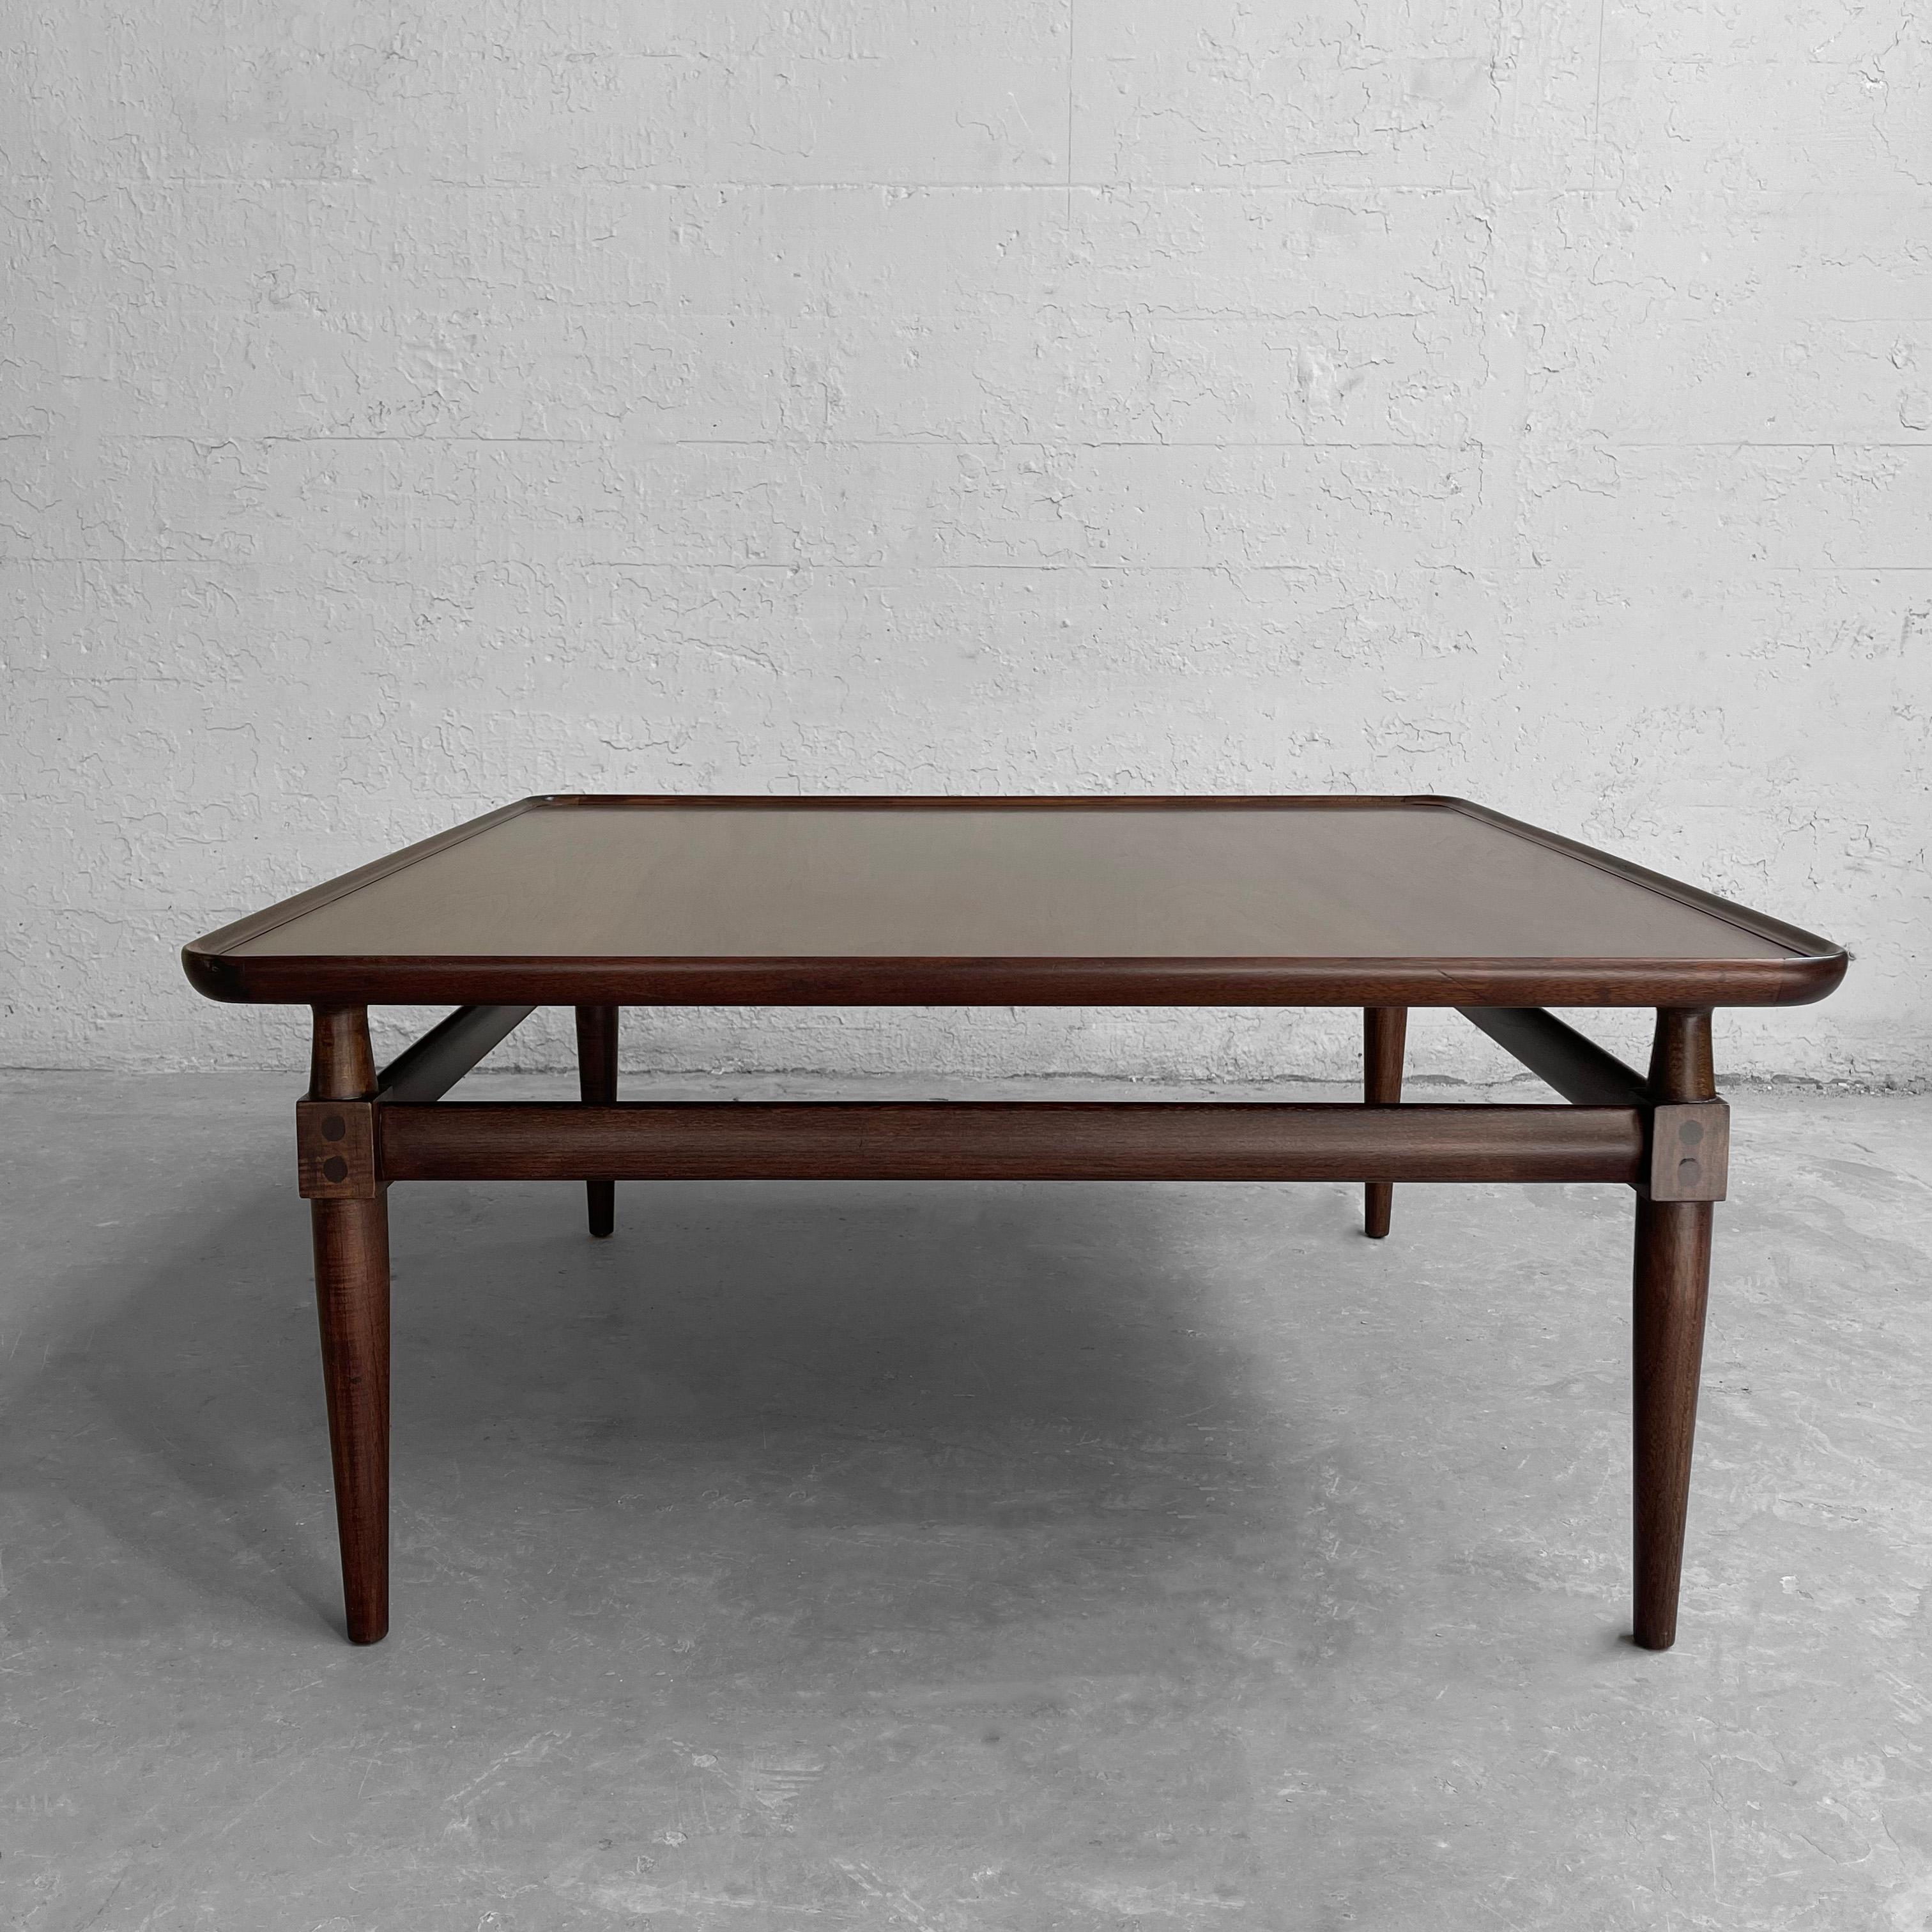 Lovely, mid-century, square, maple coffee table features upturned edges, wonderful joinery and tapered legs.